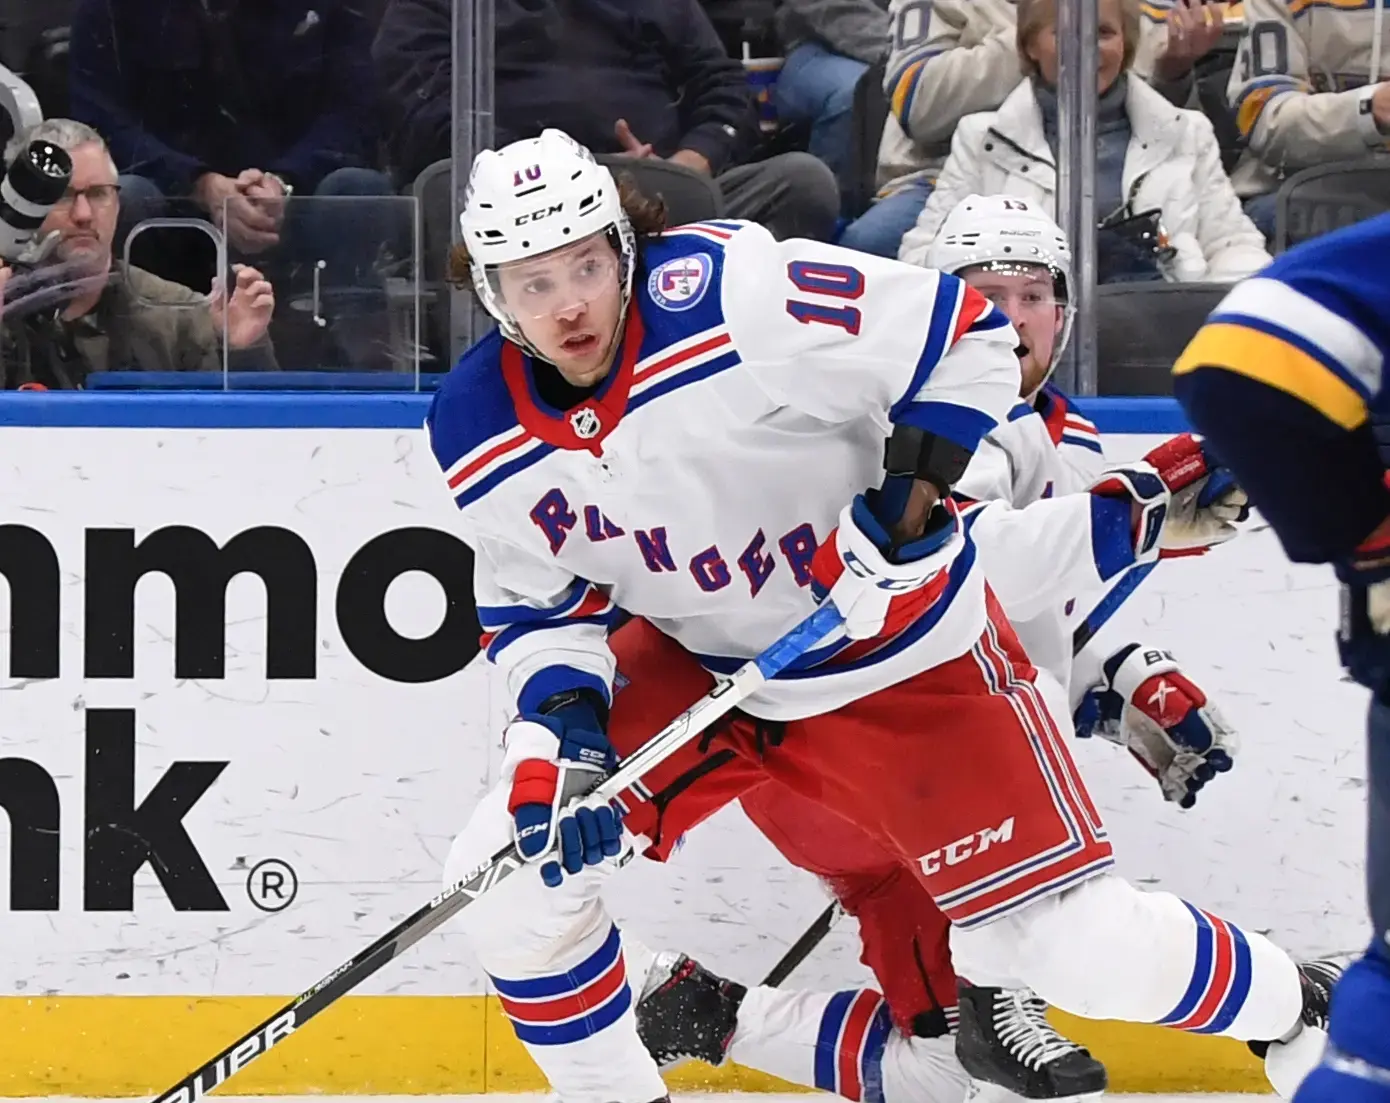 New York Rangers left wing Artemi Panarin (10) controls the puck against the St. Louis Blues during the third period at Enterprise Center. / Jeff Le-USA TODAY Sports